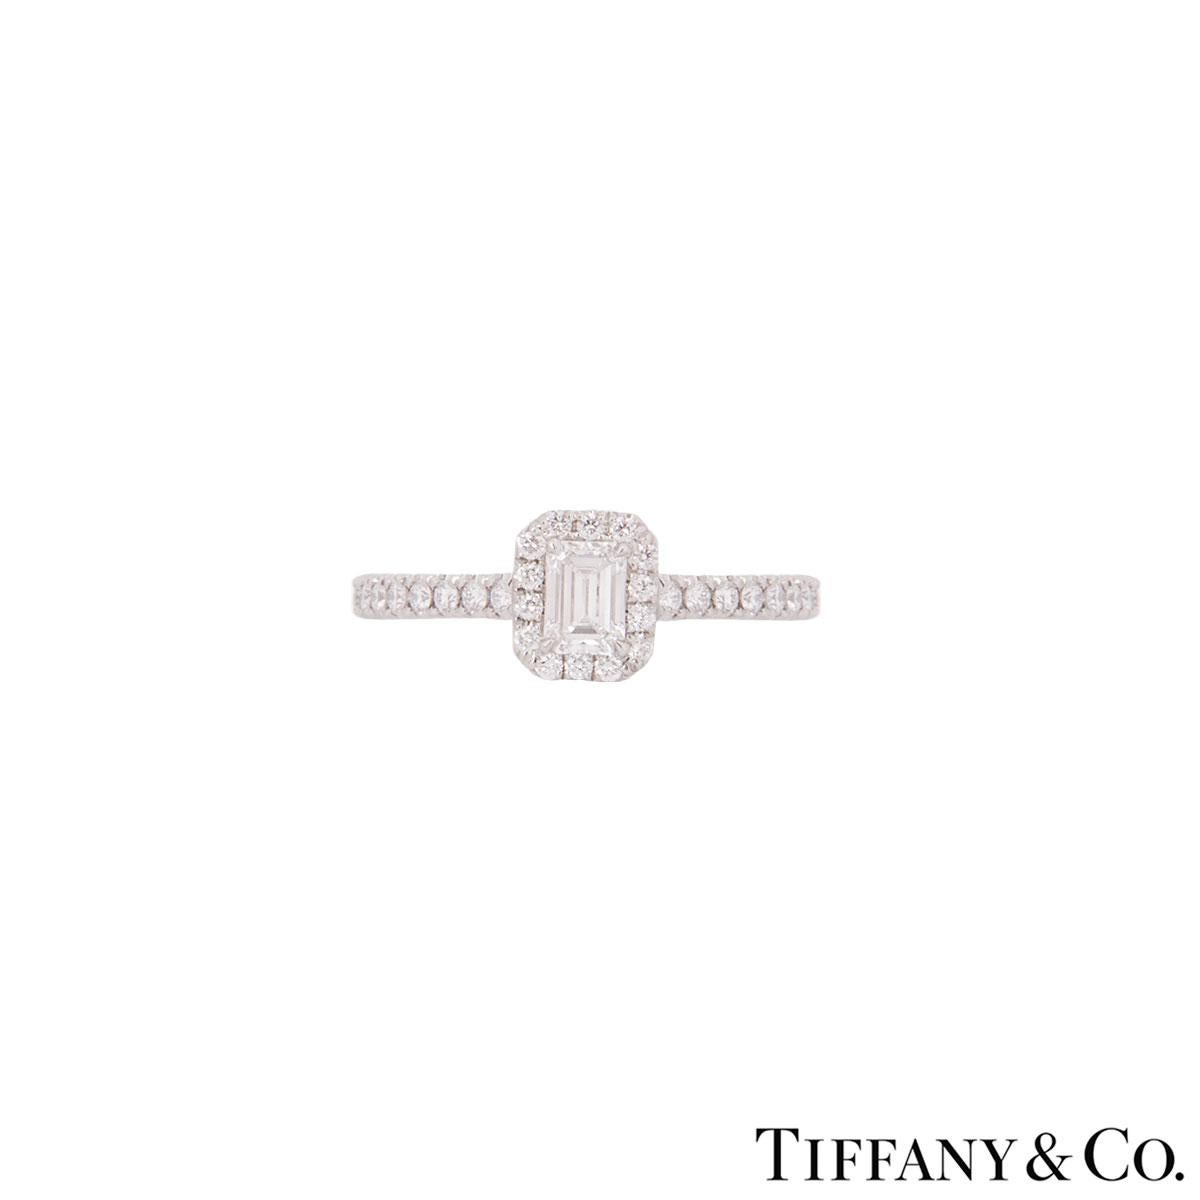 A stunning platinum diamond halo ring by Tiffany & Co. from the Soleste collection. The ring features an emerald cut diamond in a four claw setting in the centre with a weight of 0.25ct, predominantly F-G in colour and VS clarity. The diamond is